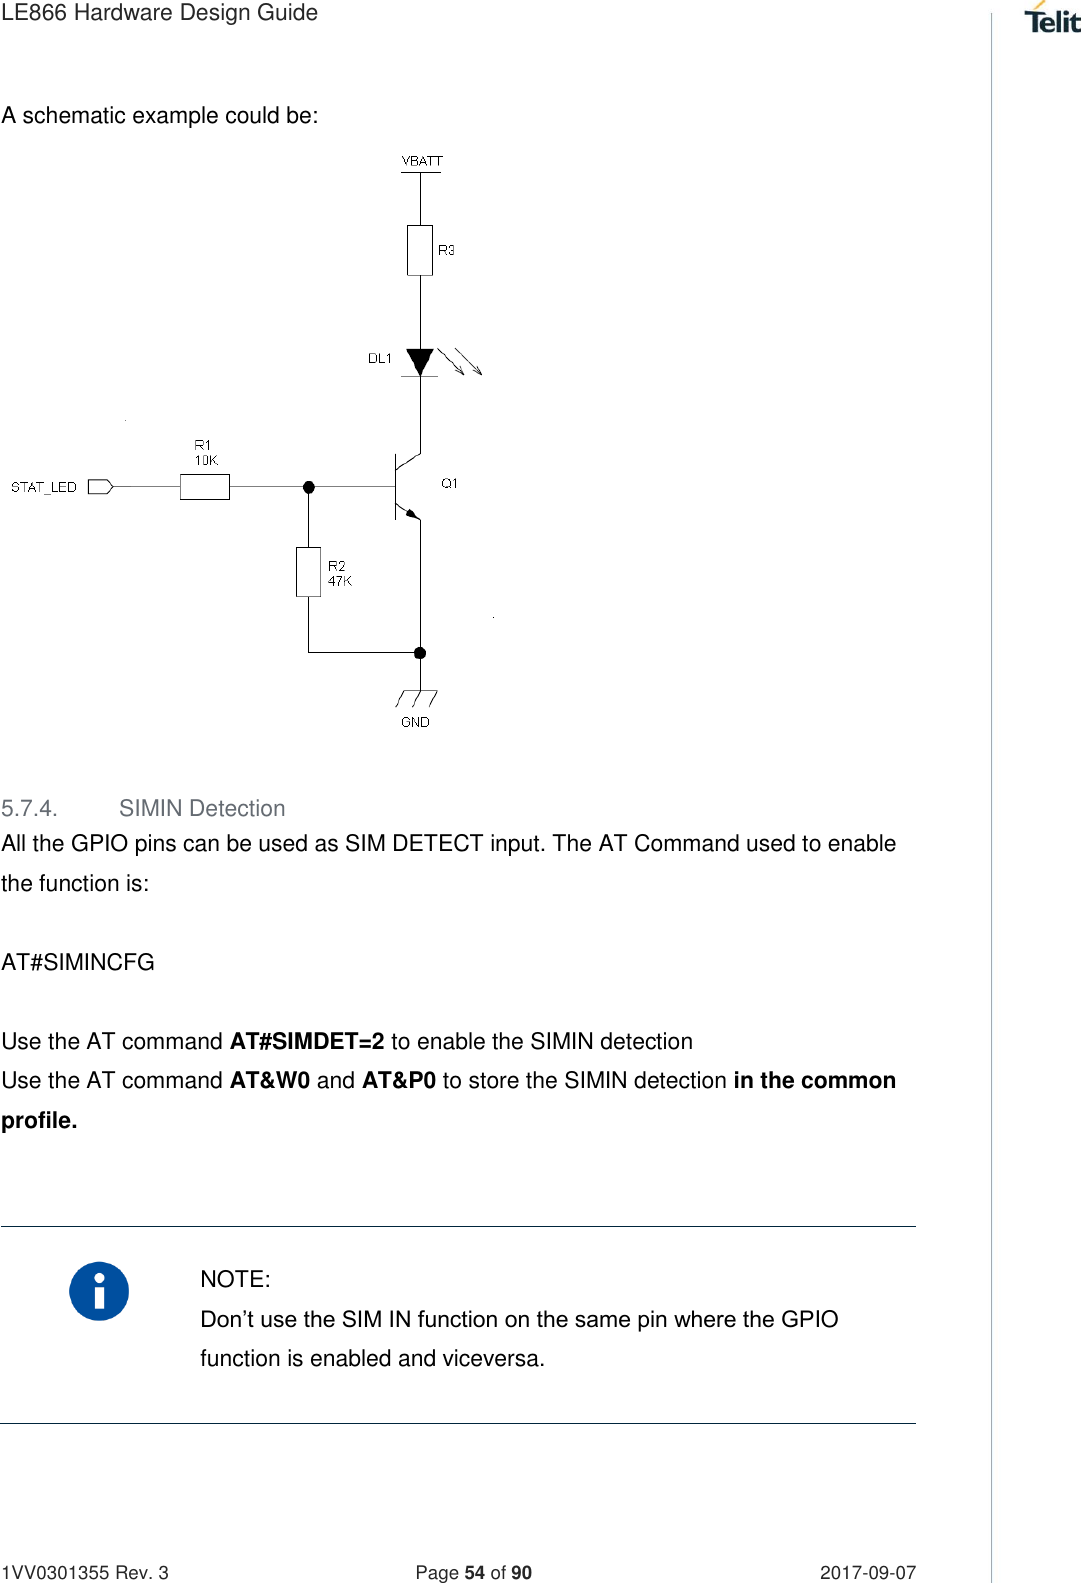 LE866 Hardware Design Guide   1VV0301355 Rev. 3   Page 54 of 90 2017-09-07  A schematic example could be:                   5.7.4.  SIMIN Detection All the GPIO pins can be used as SIM DETECT input. The AT Command used to enable the function is:   AT#SIMINCFG  Use the AT command AT#SIMDET=2 to enable the SIMIN detection  Use the AT command AT&amp;W0 and AT&amp;P0 to store the SIMIN detection in the common profile.     NOTE: Don’t use the SIM IN function on the same pin where the GPIO function is enabled and viceversa.    